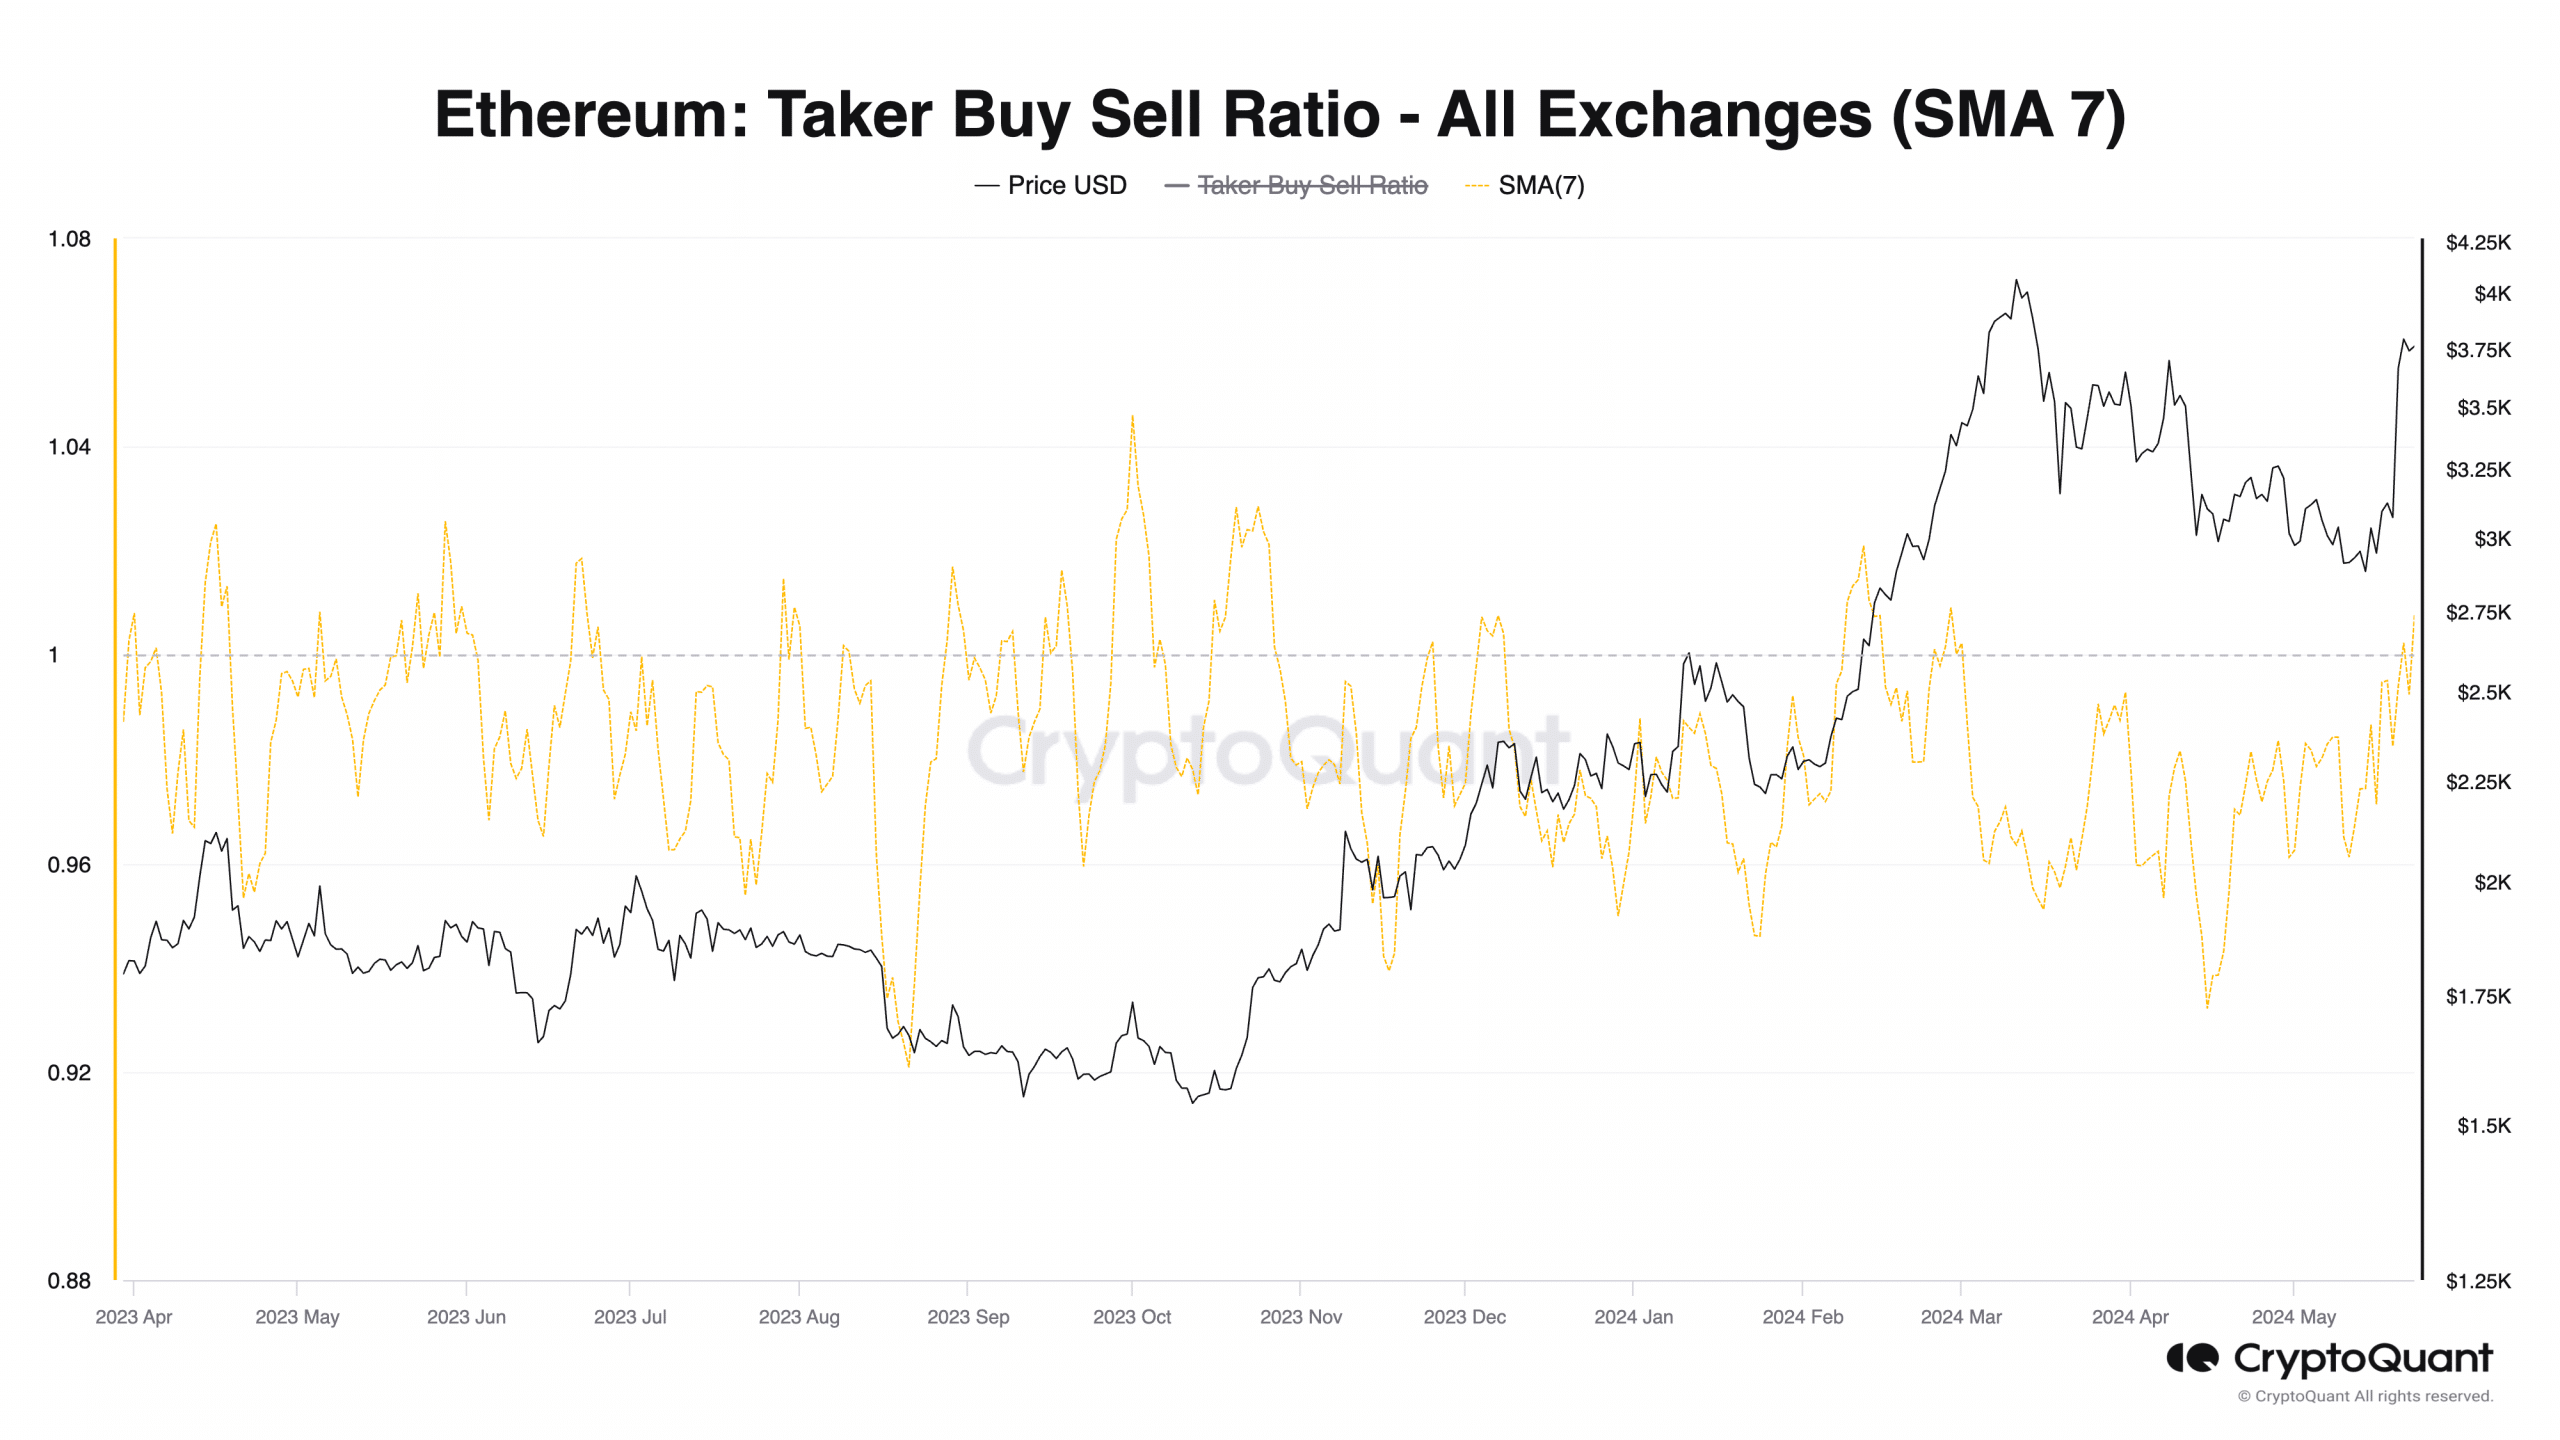 Ethereum Taker Buy Sell Ratio - All Exchanges (SMA 7)